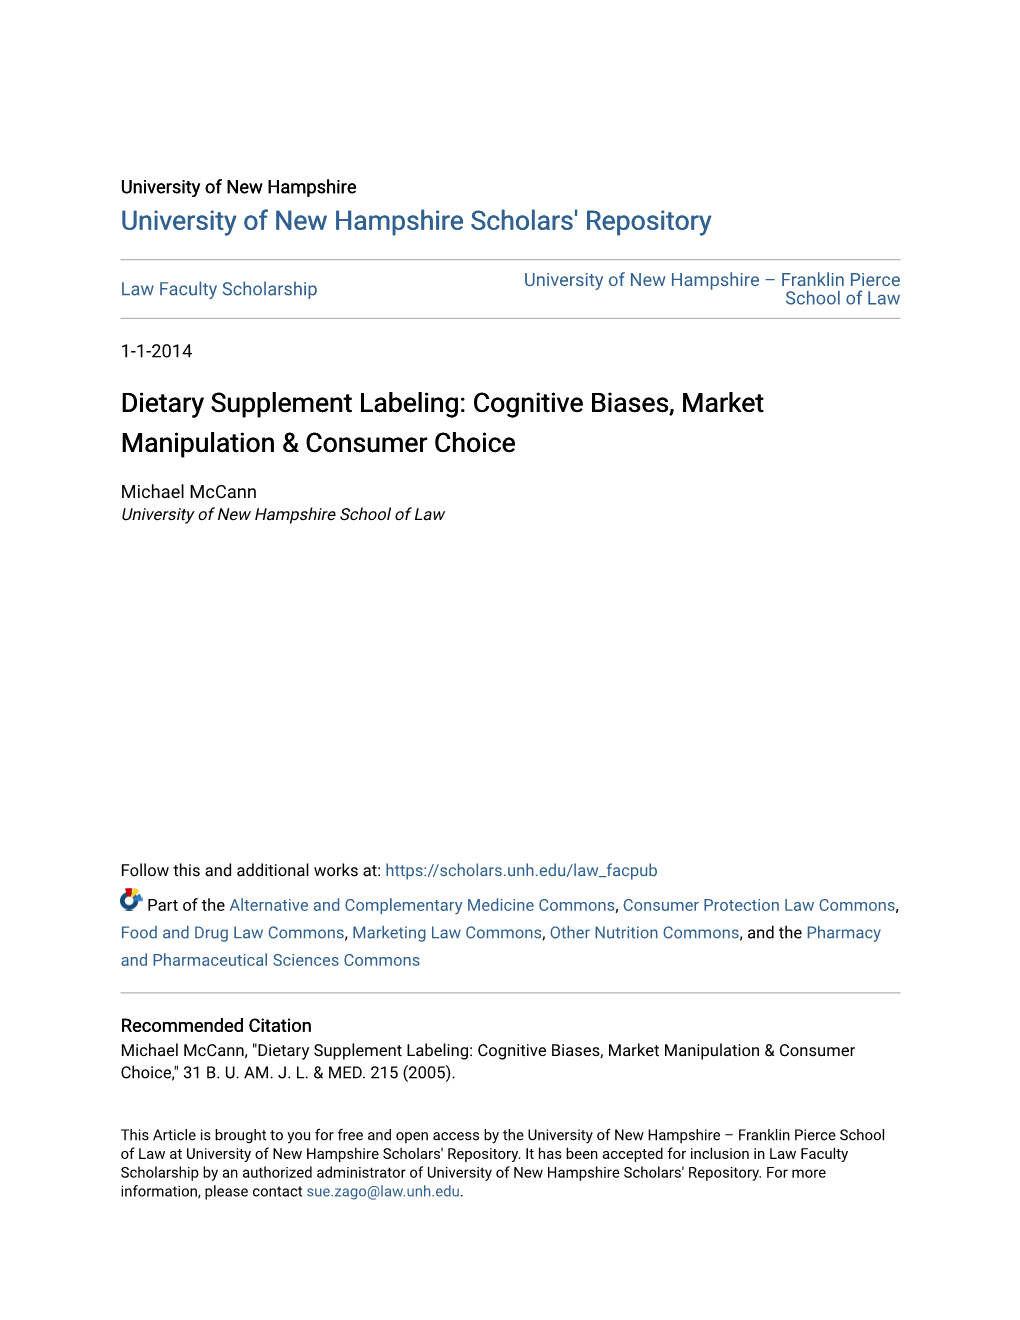 Dietary Supplement Labeling: Cognitive Biases, Market Manipulation & Consumer Choice